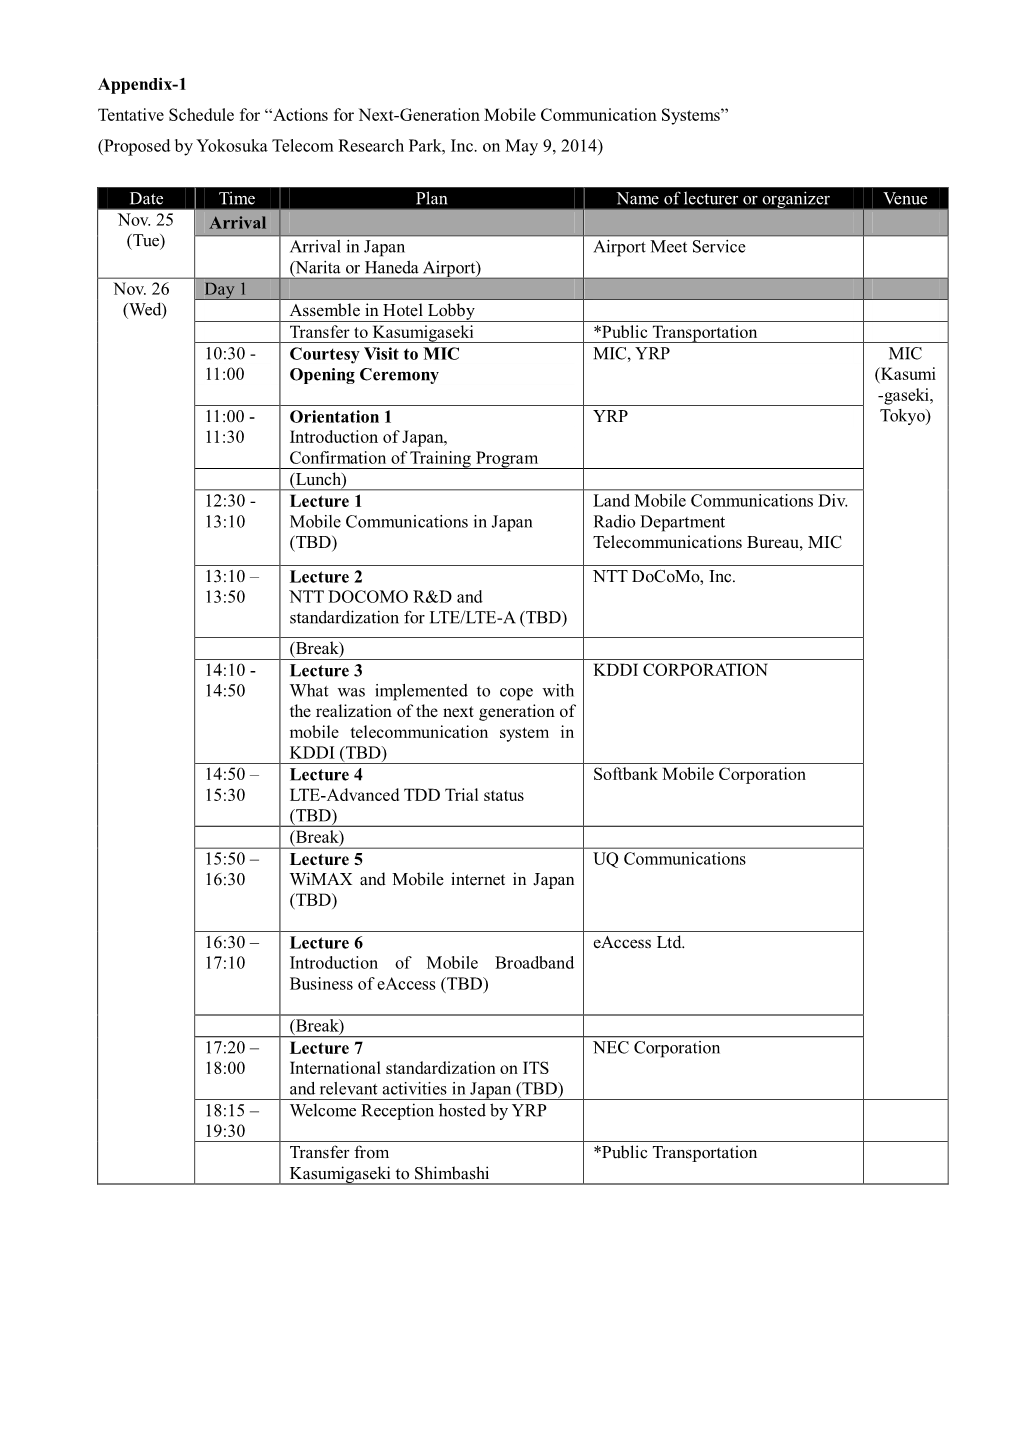 Appendix-1 Tentative Schedule for “Actions for Next-Generation Mobile Communication Systems” (Proposed by Yokosuka Telecom Research Park, Inc